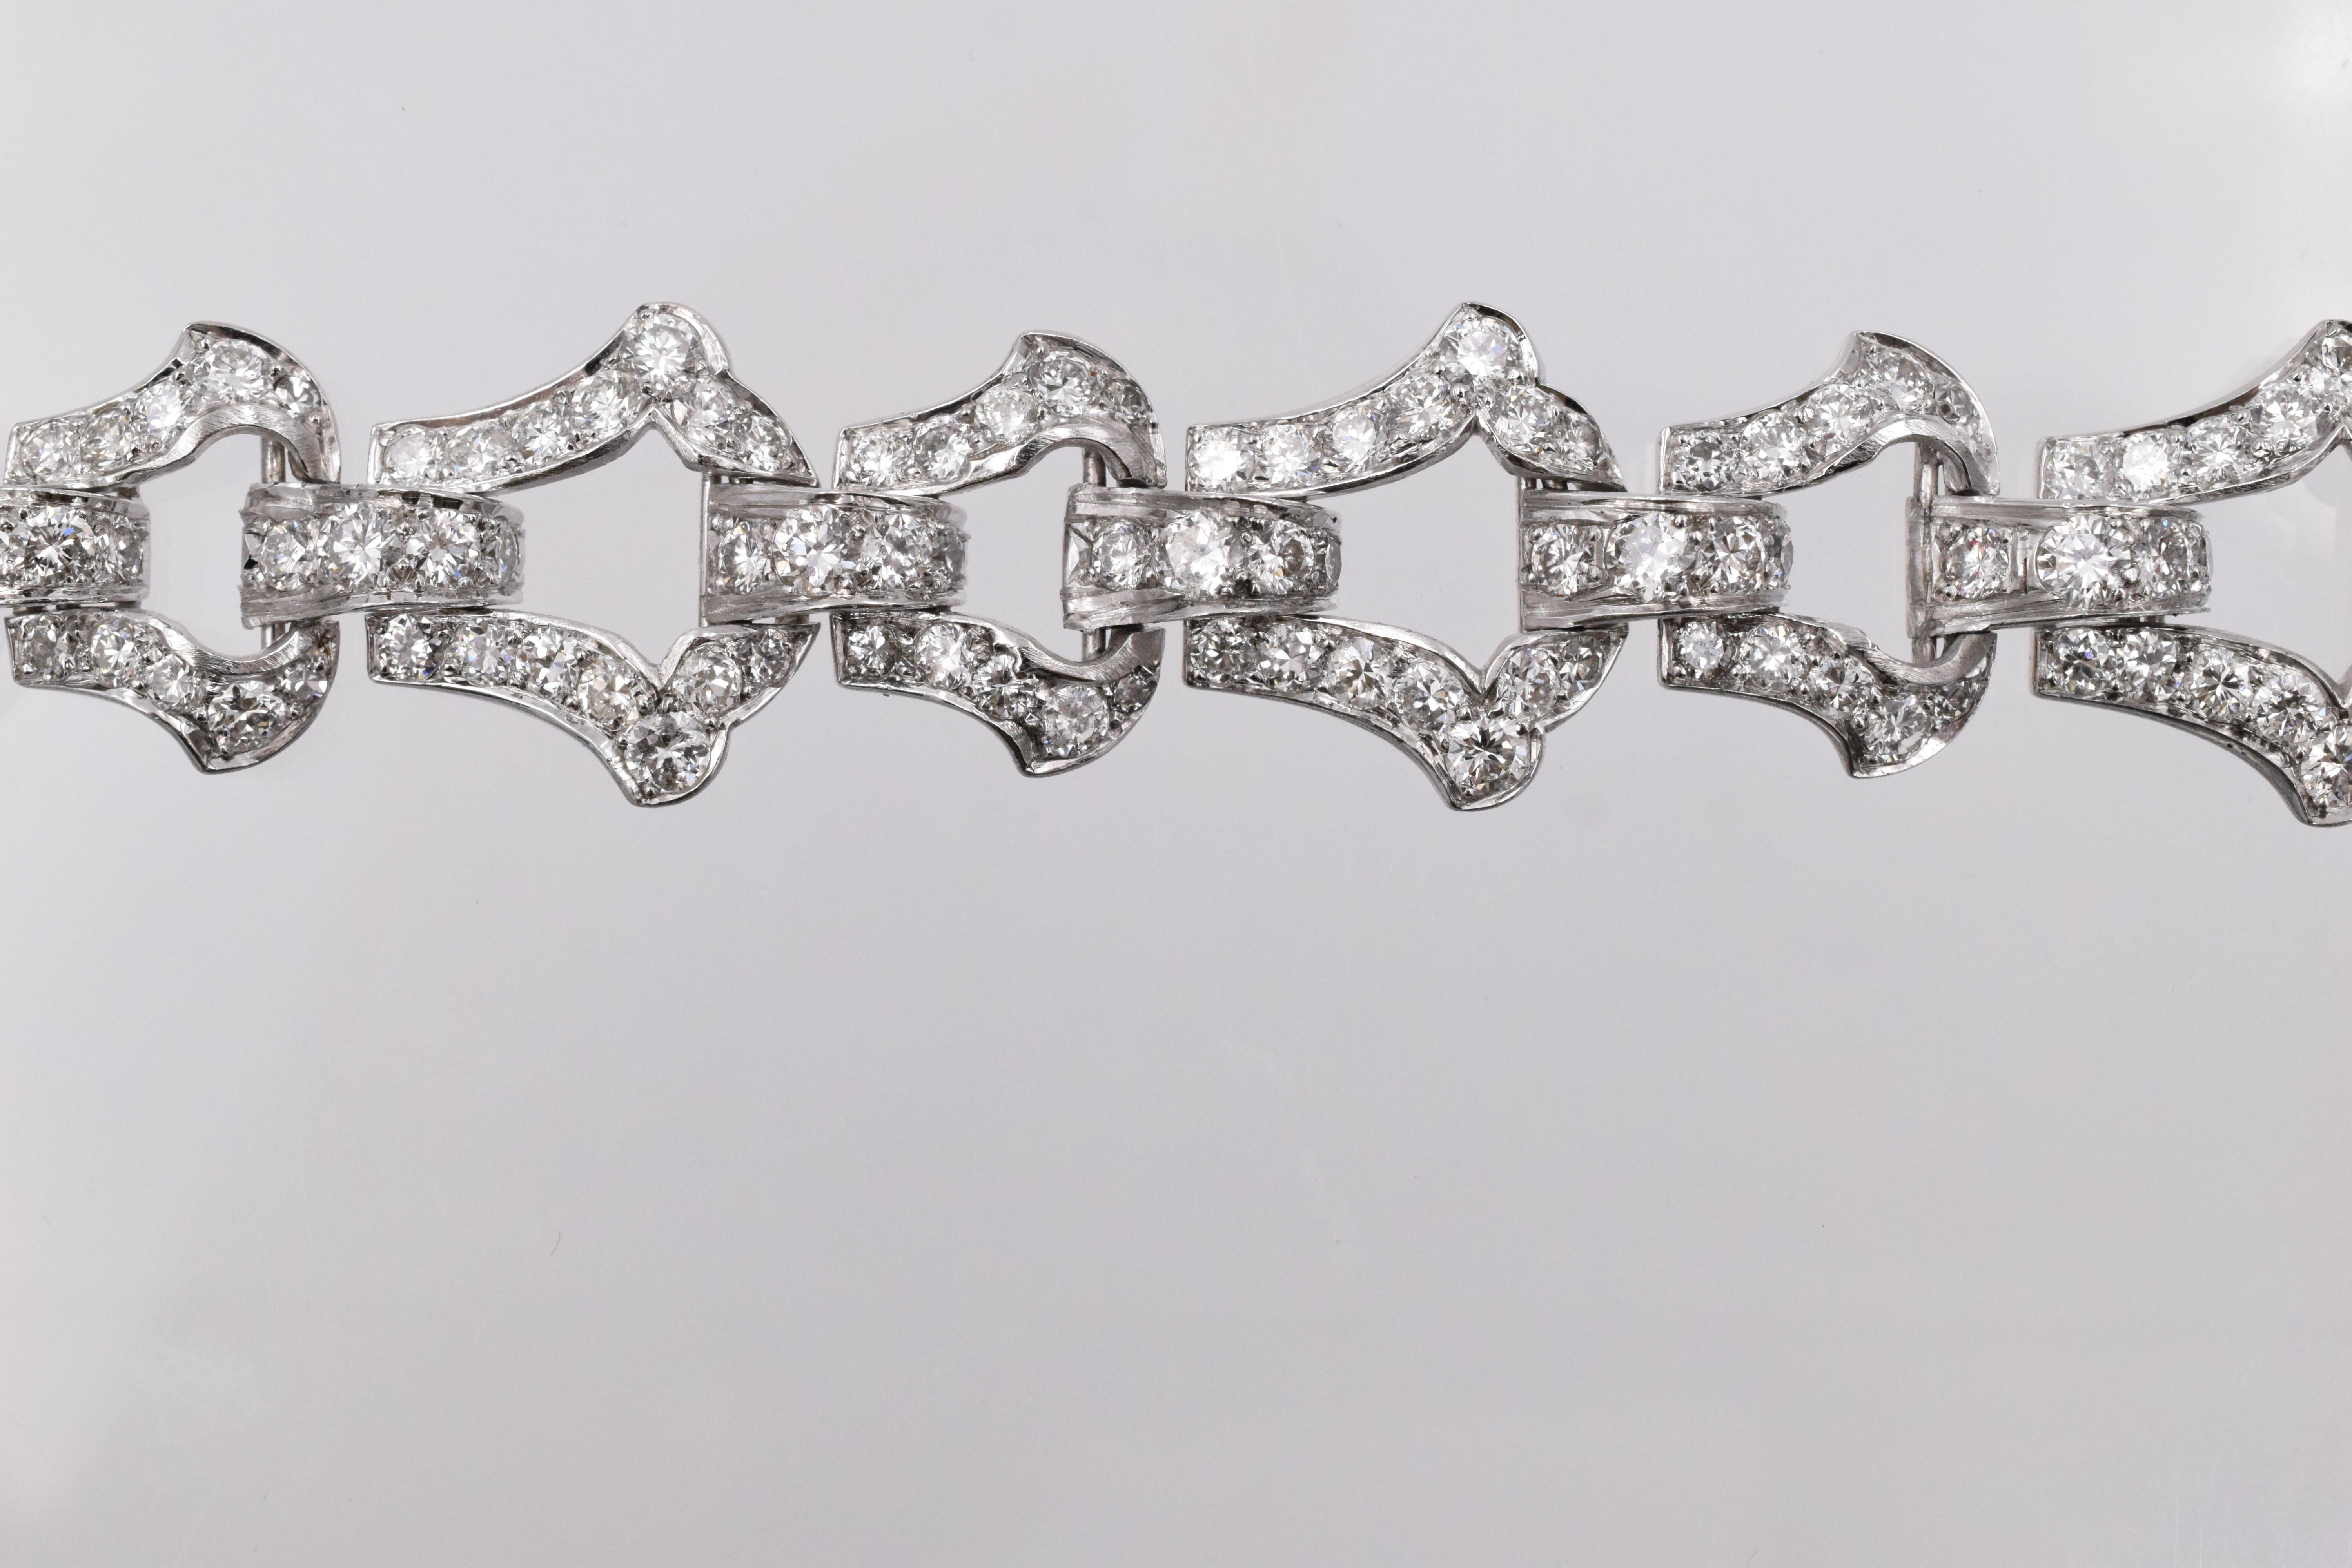 Art Deco 
Classic Cartier diamond bracelet with 15 carats of fine diamonds set in platinum.
Stamped and  signed: Cartier pl